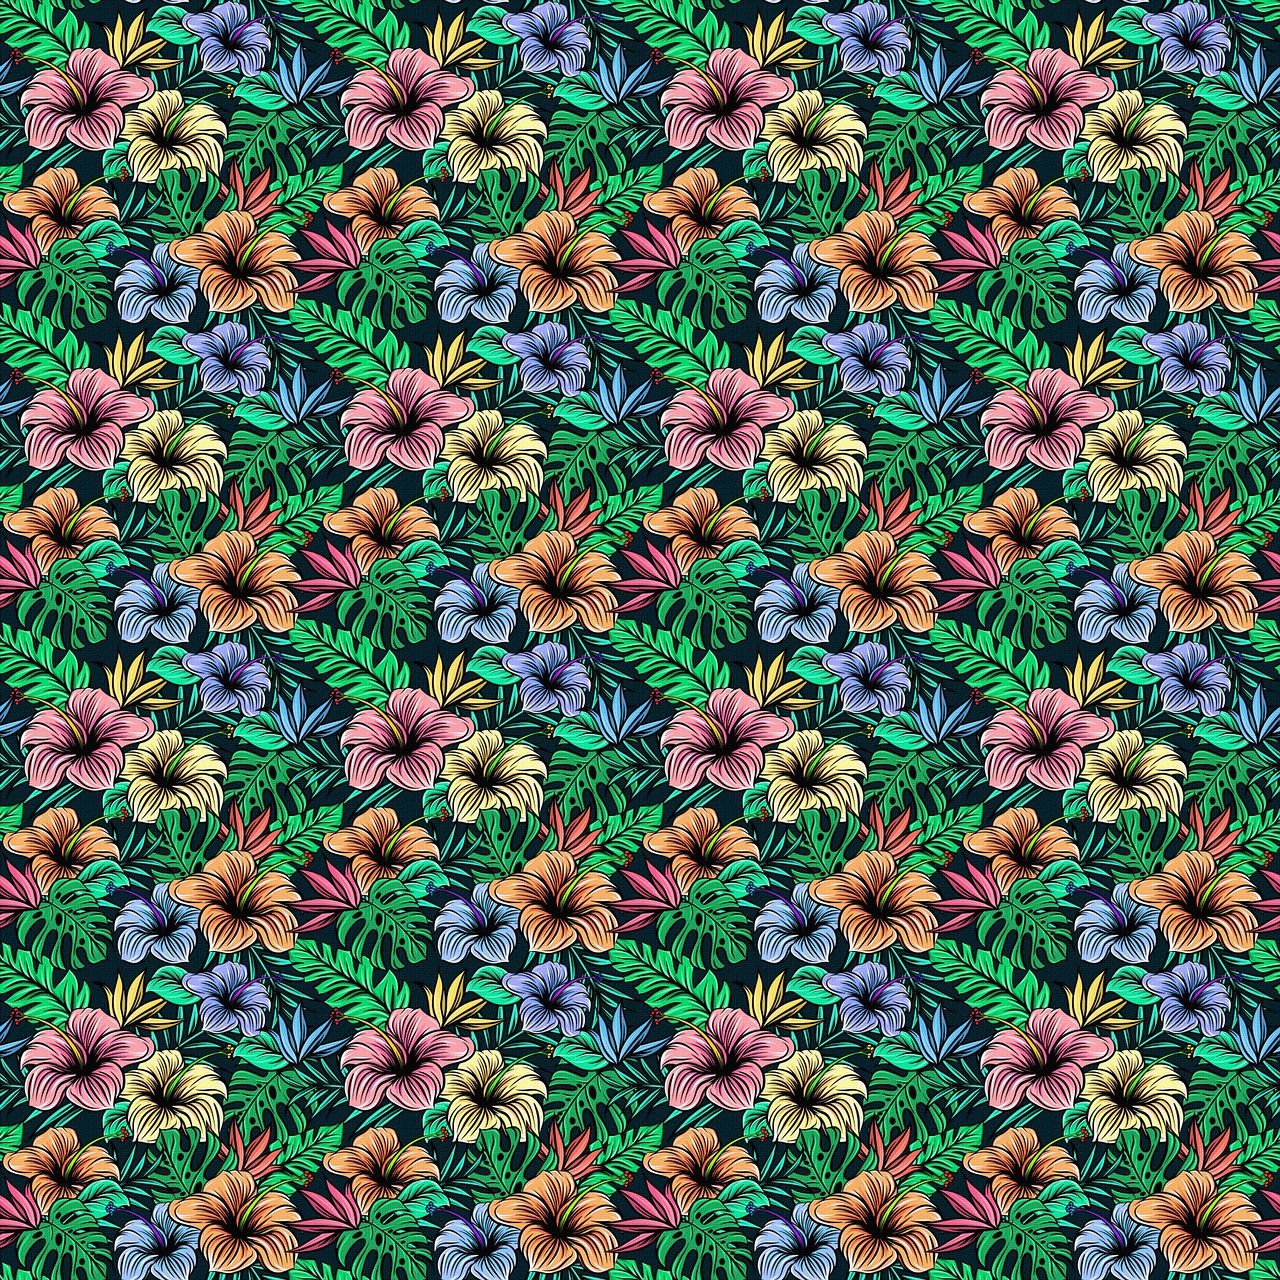 a pattern of flowers and leaves on a green background, shutterstock, maximalism, hibiscus flowers, full of colour 8-w 1024, with a black background, coloured with lots of colour